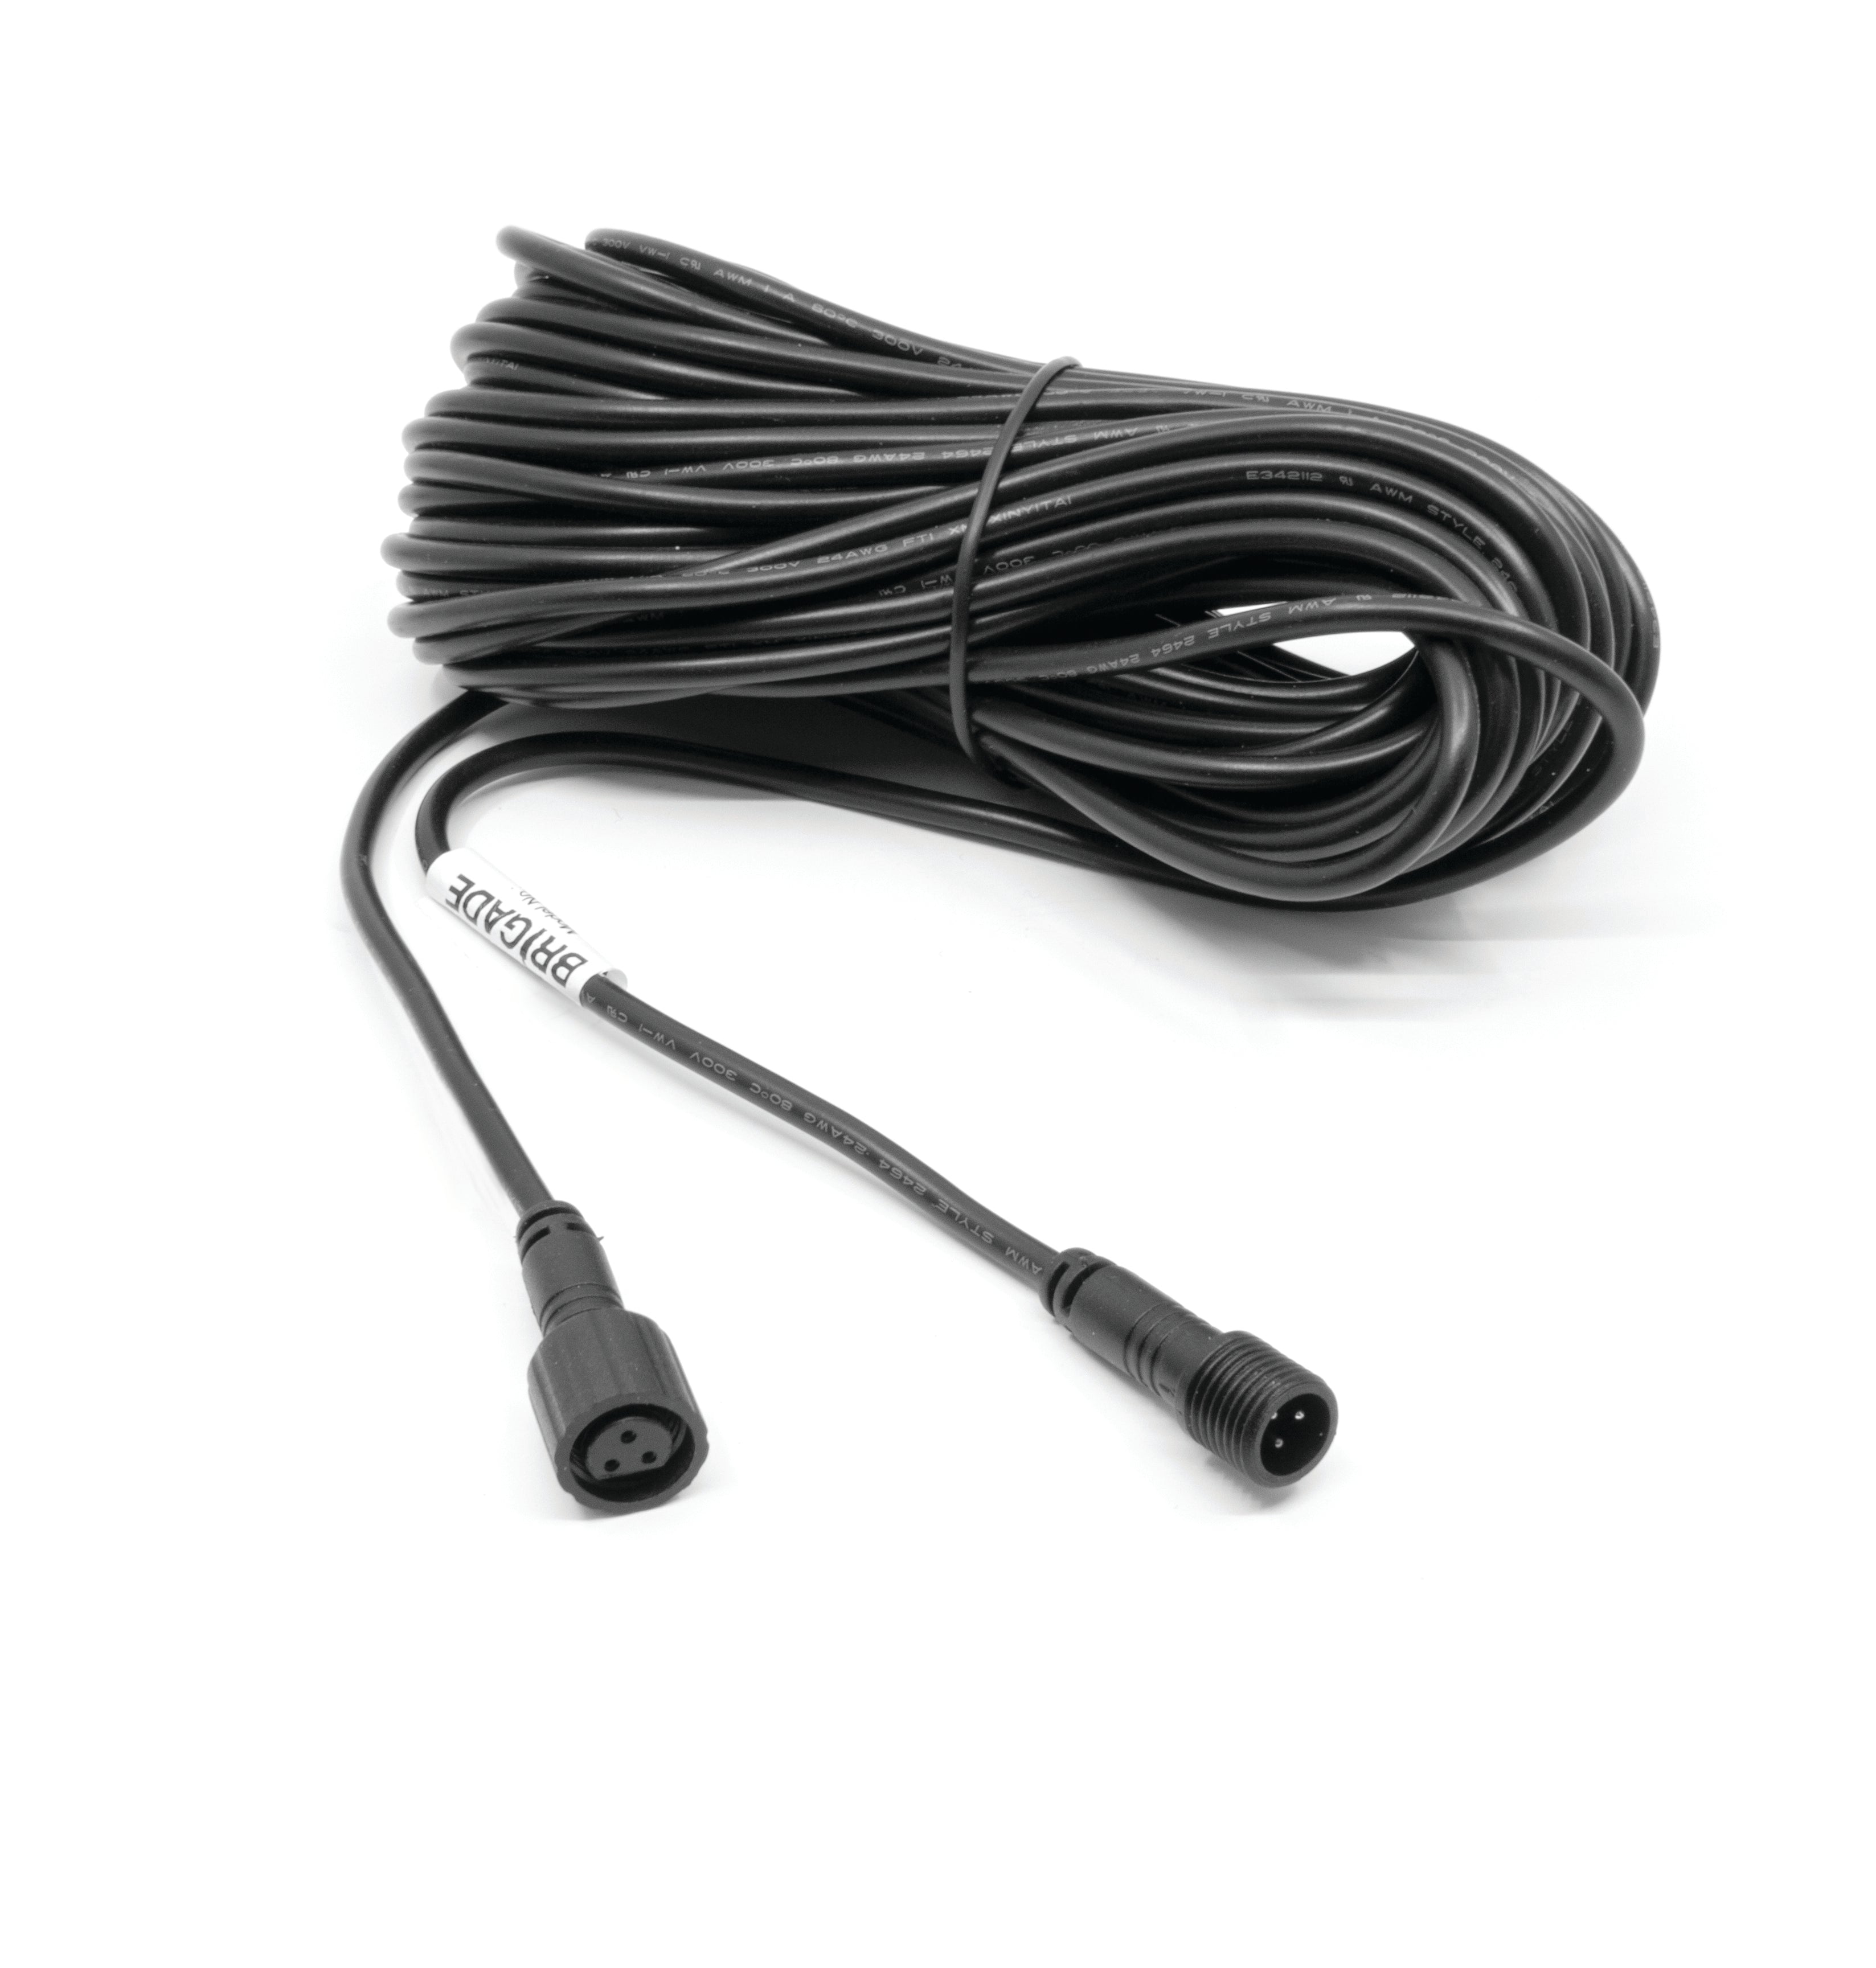 Sensor extension cable 4.5 Metre for Ultrasonic detection systems